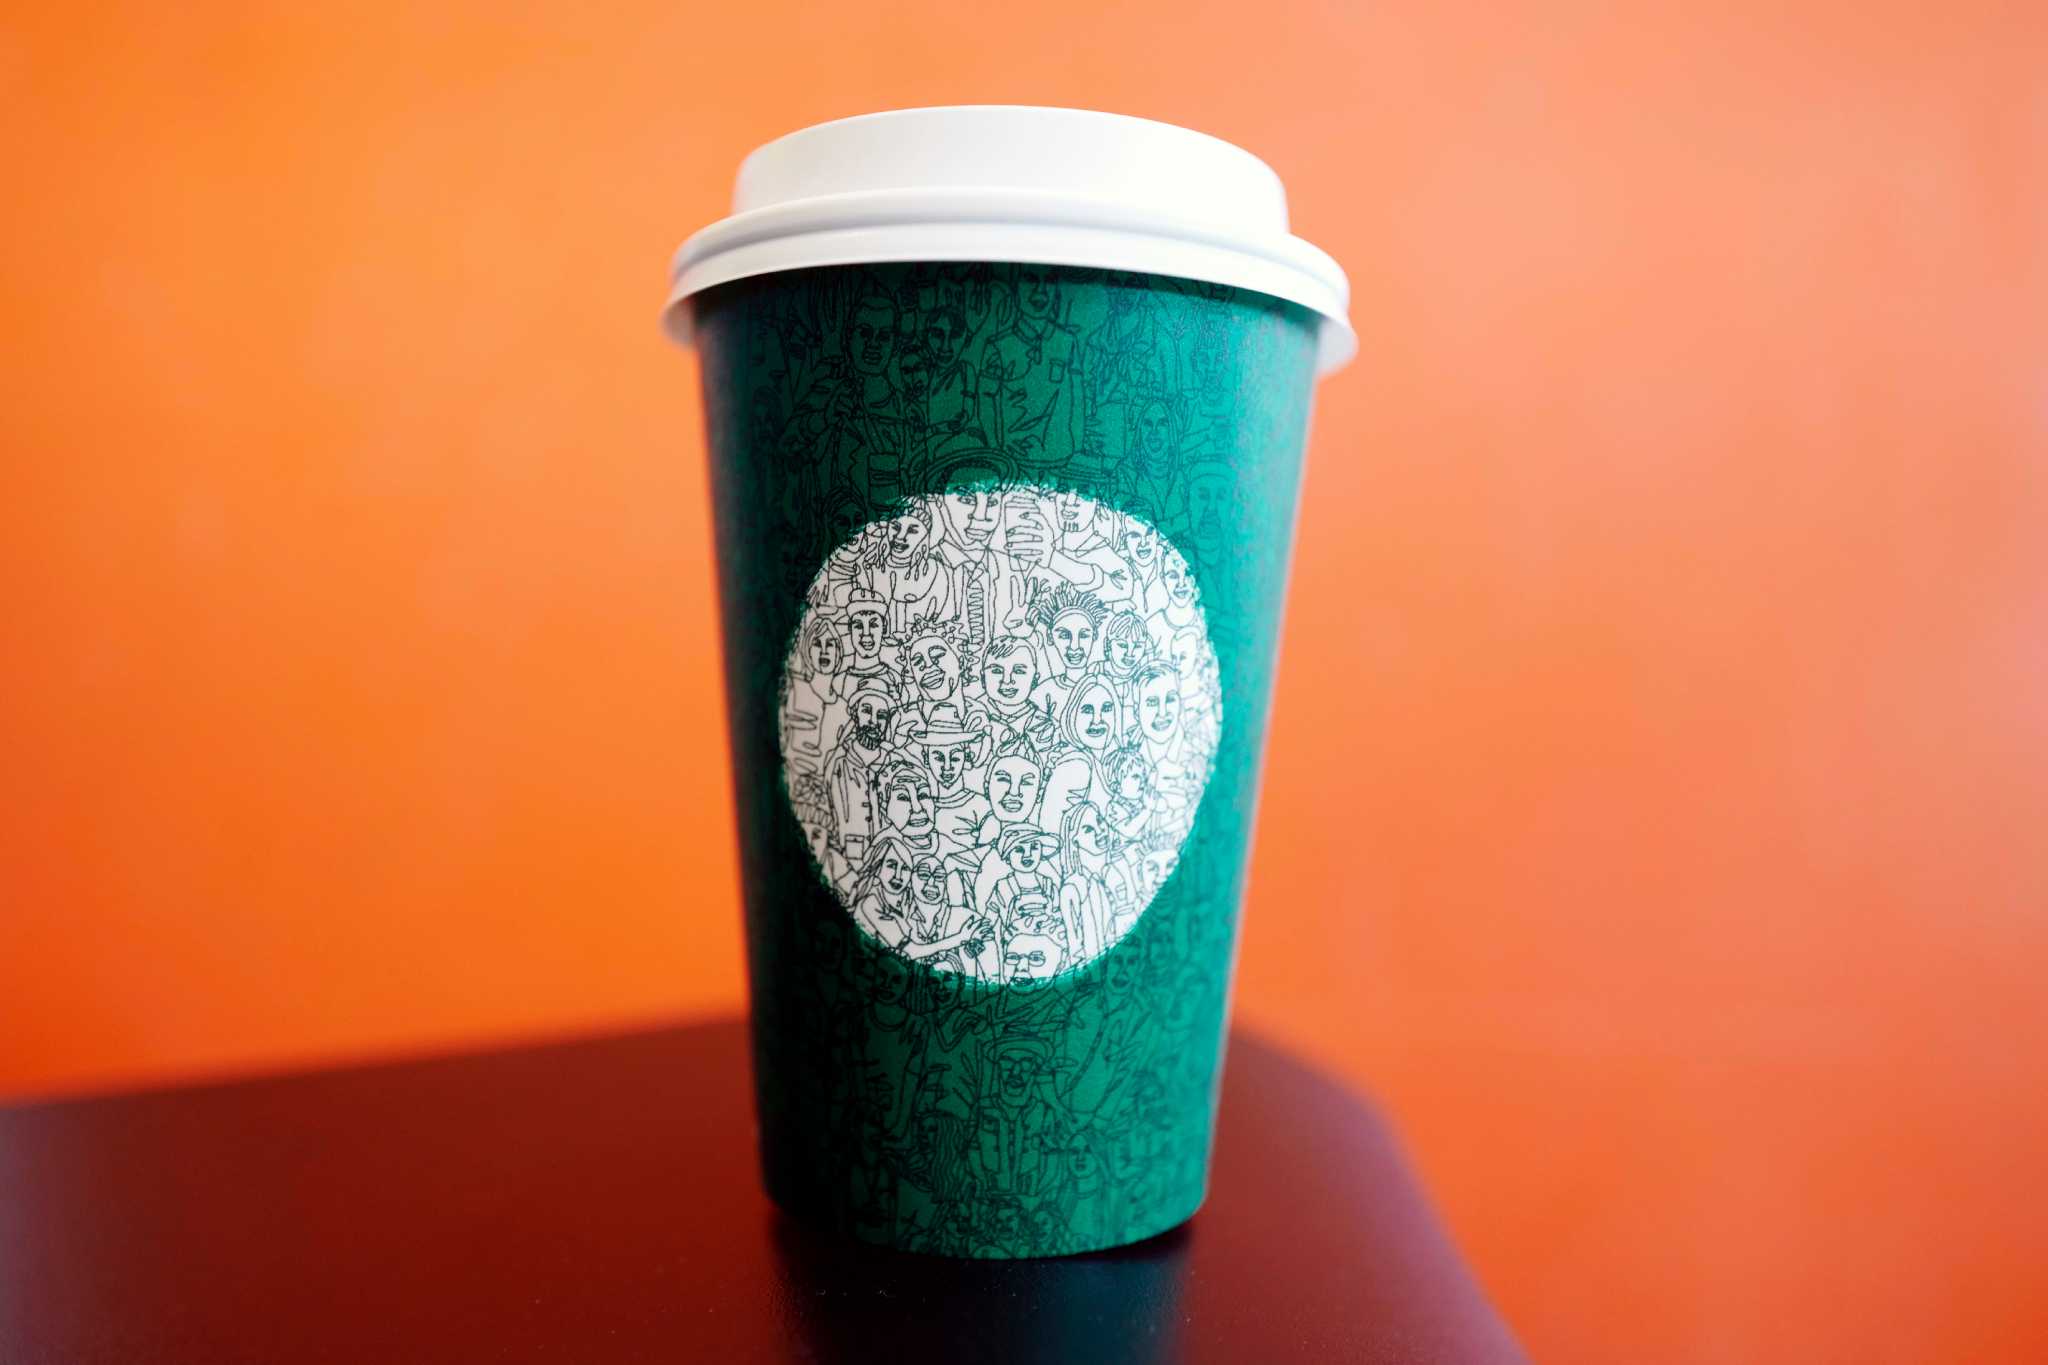 Starbucks rolls out 'unity' cup ahead of Election Day